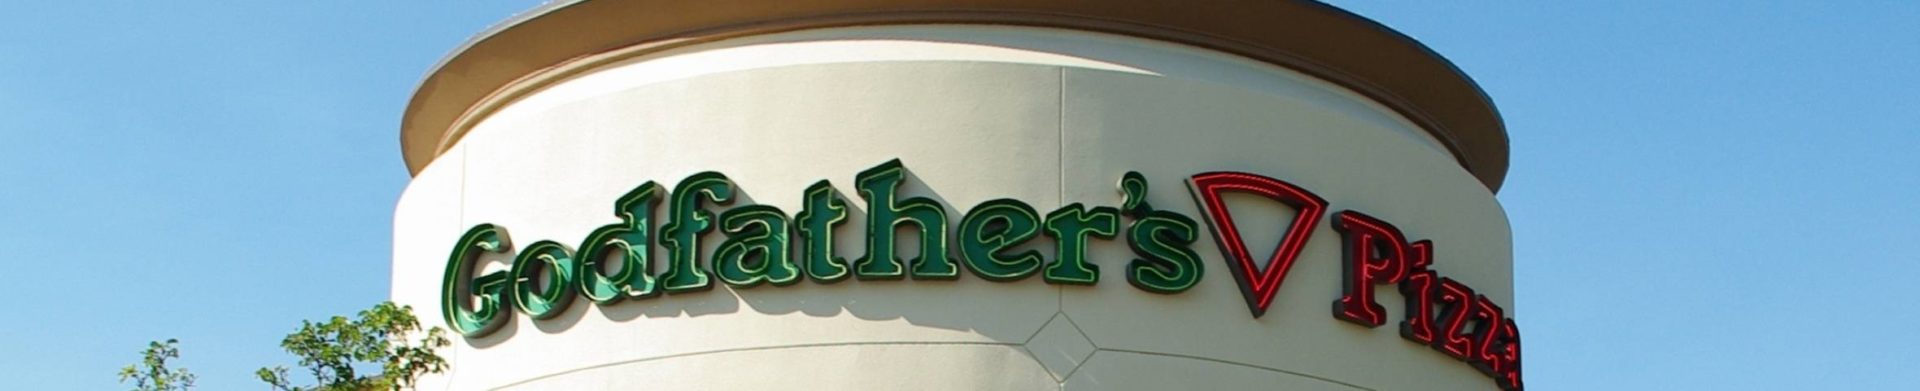 Exterior of a Godfather's Pizza restaurant